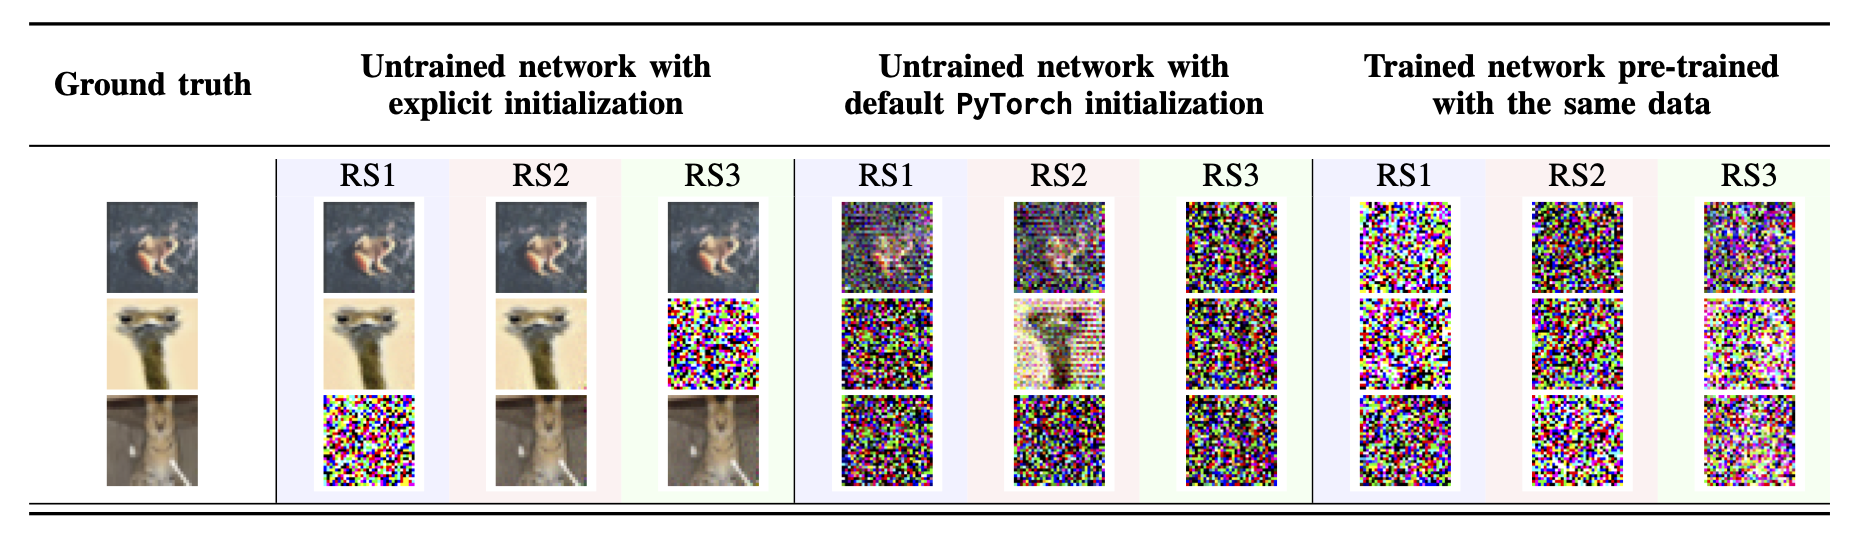 Reconstructing a single image using the DLG attack, with different model initialization methods or training stages.